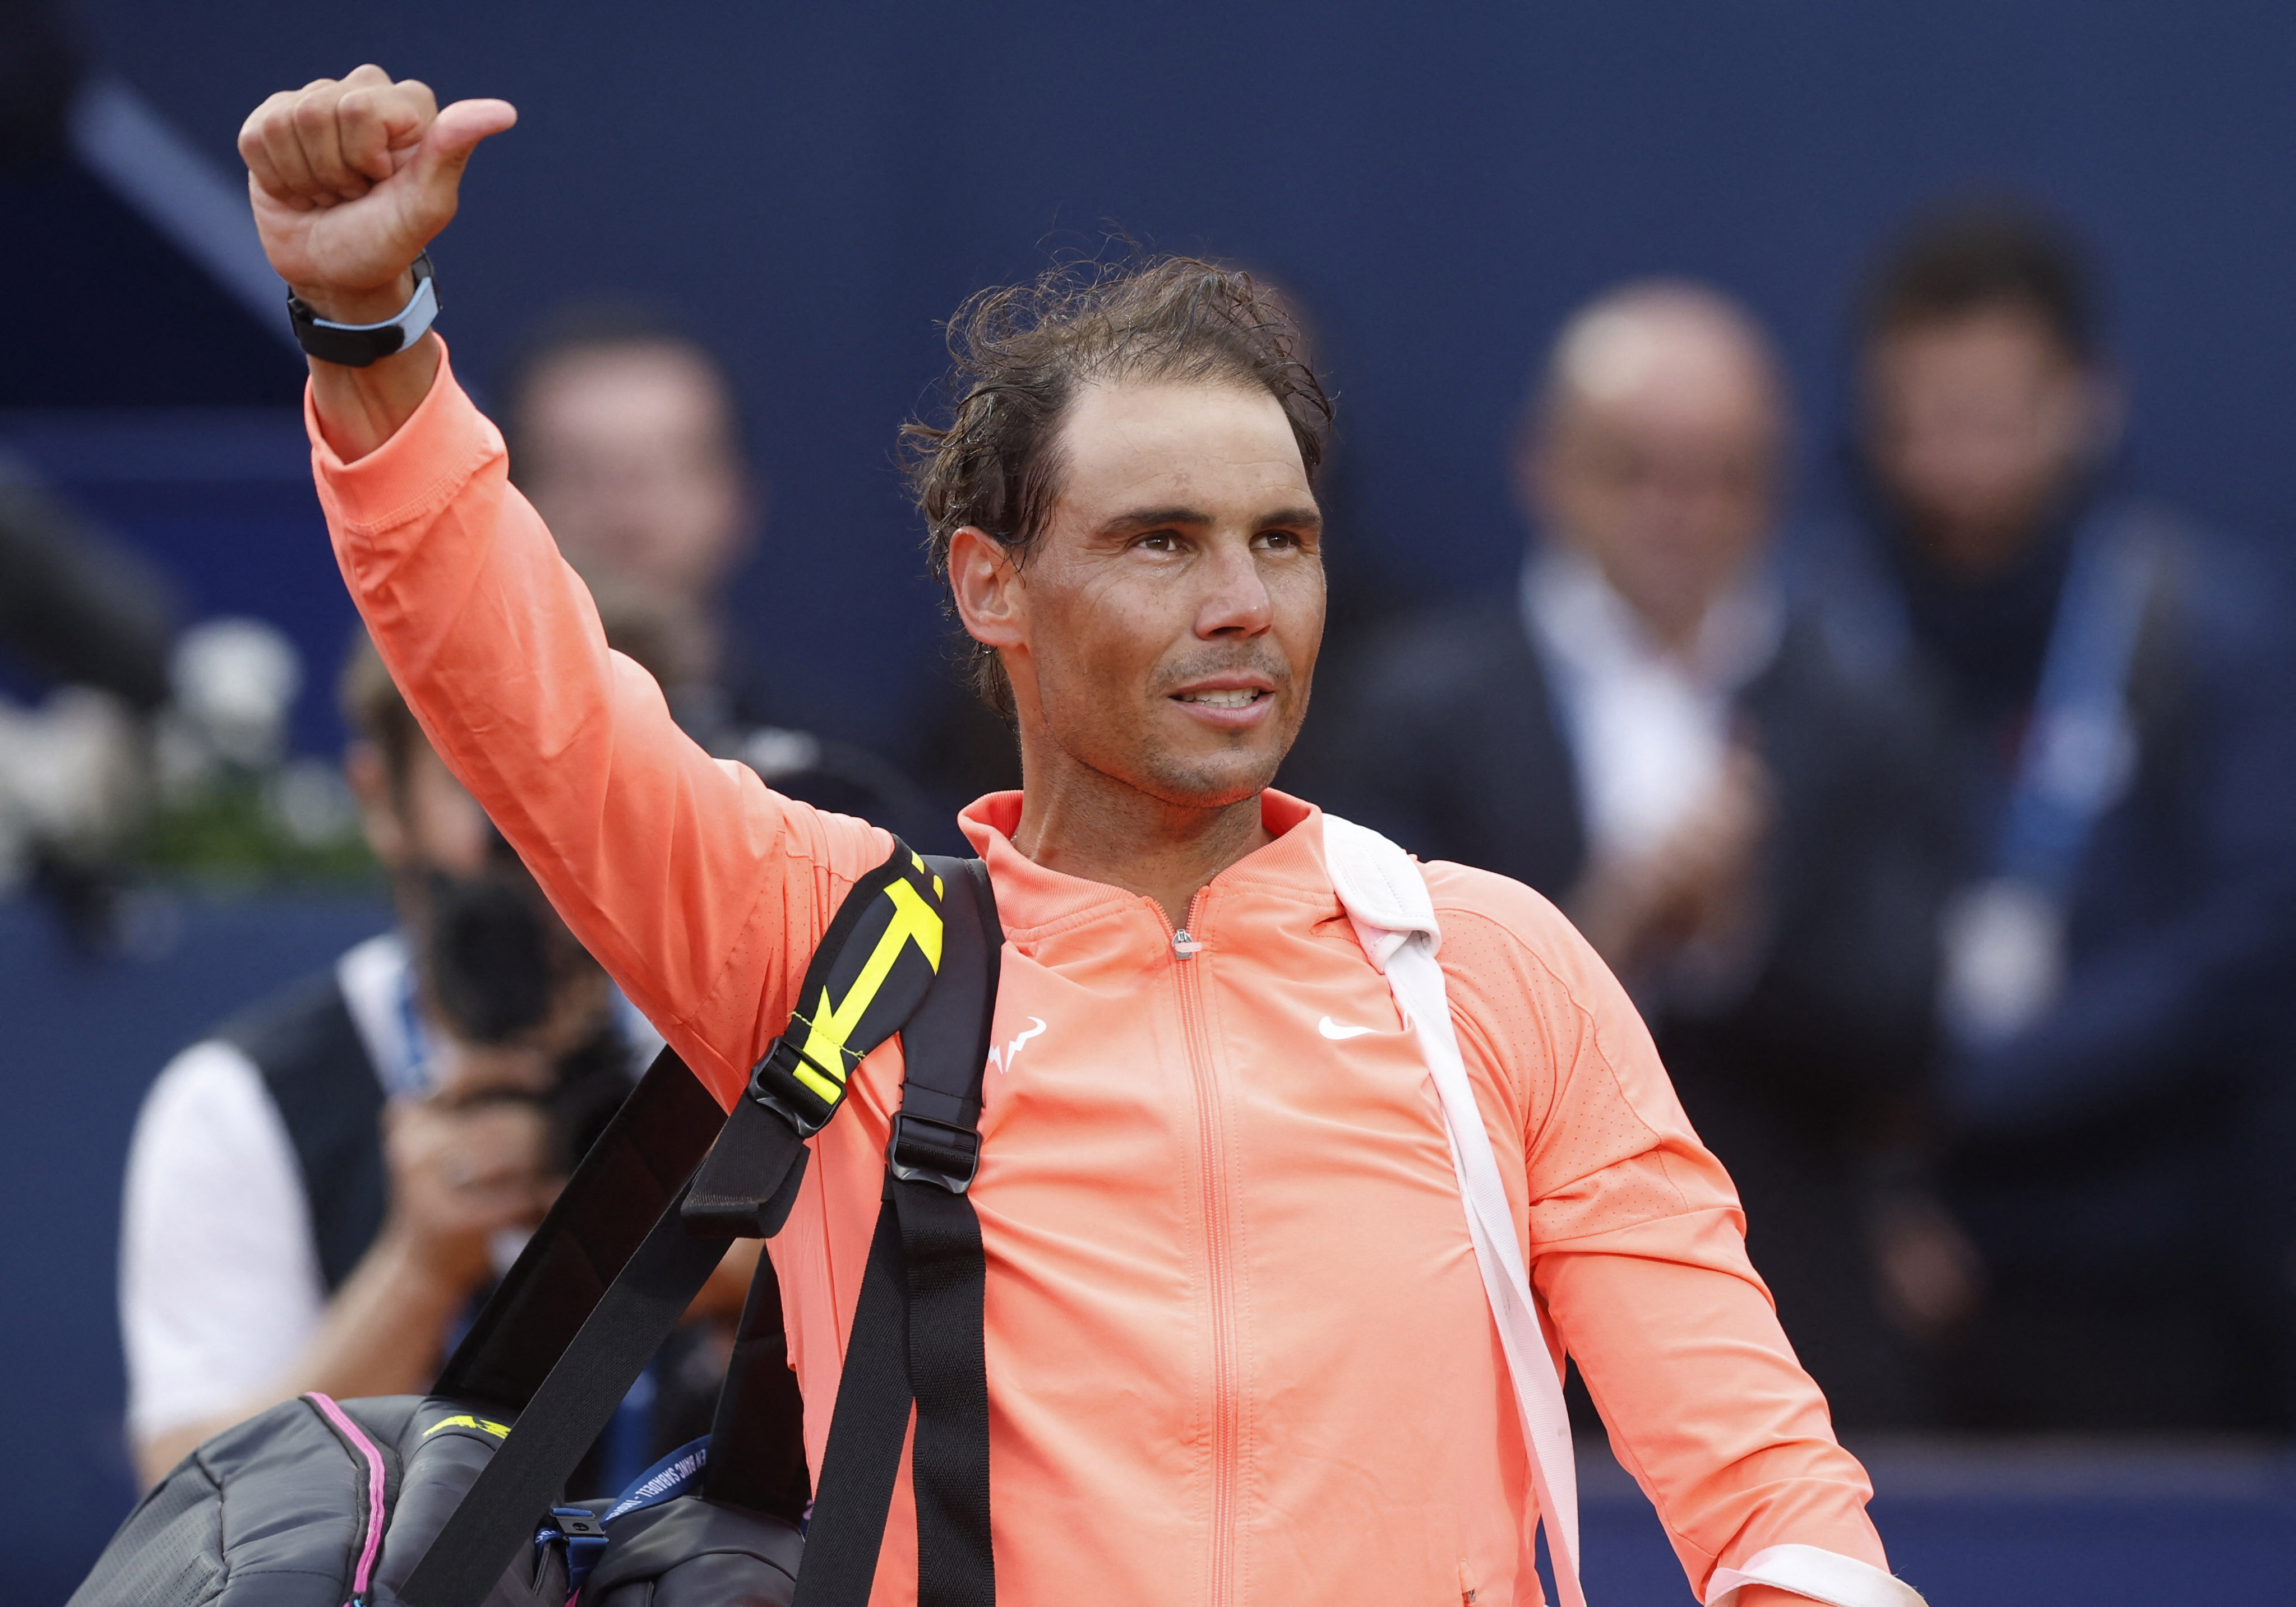 greater goals spain s rafael nadal reacts after losing his round of 32 match against australia s alex de minaur in the atp 500 barcelona open at real club de tenis barcelona reuters